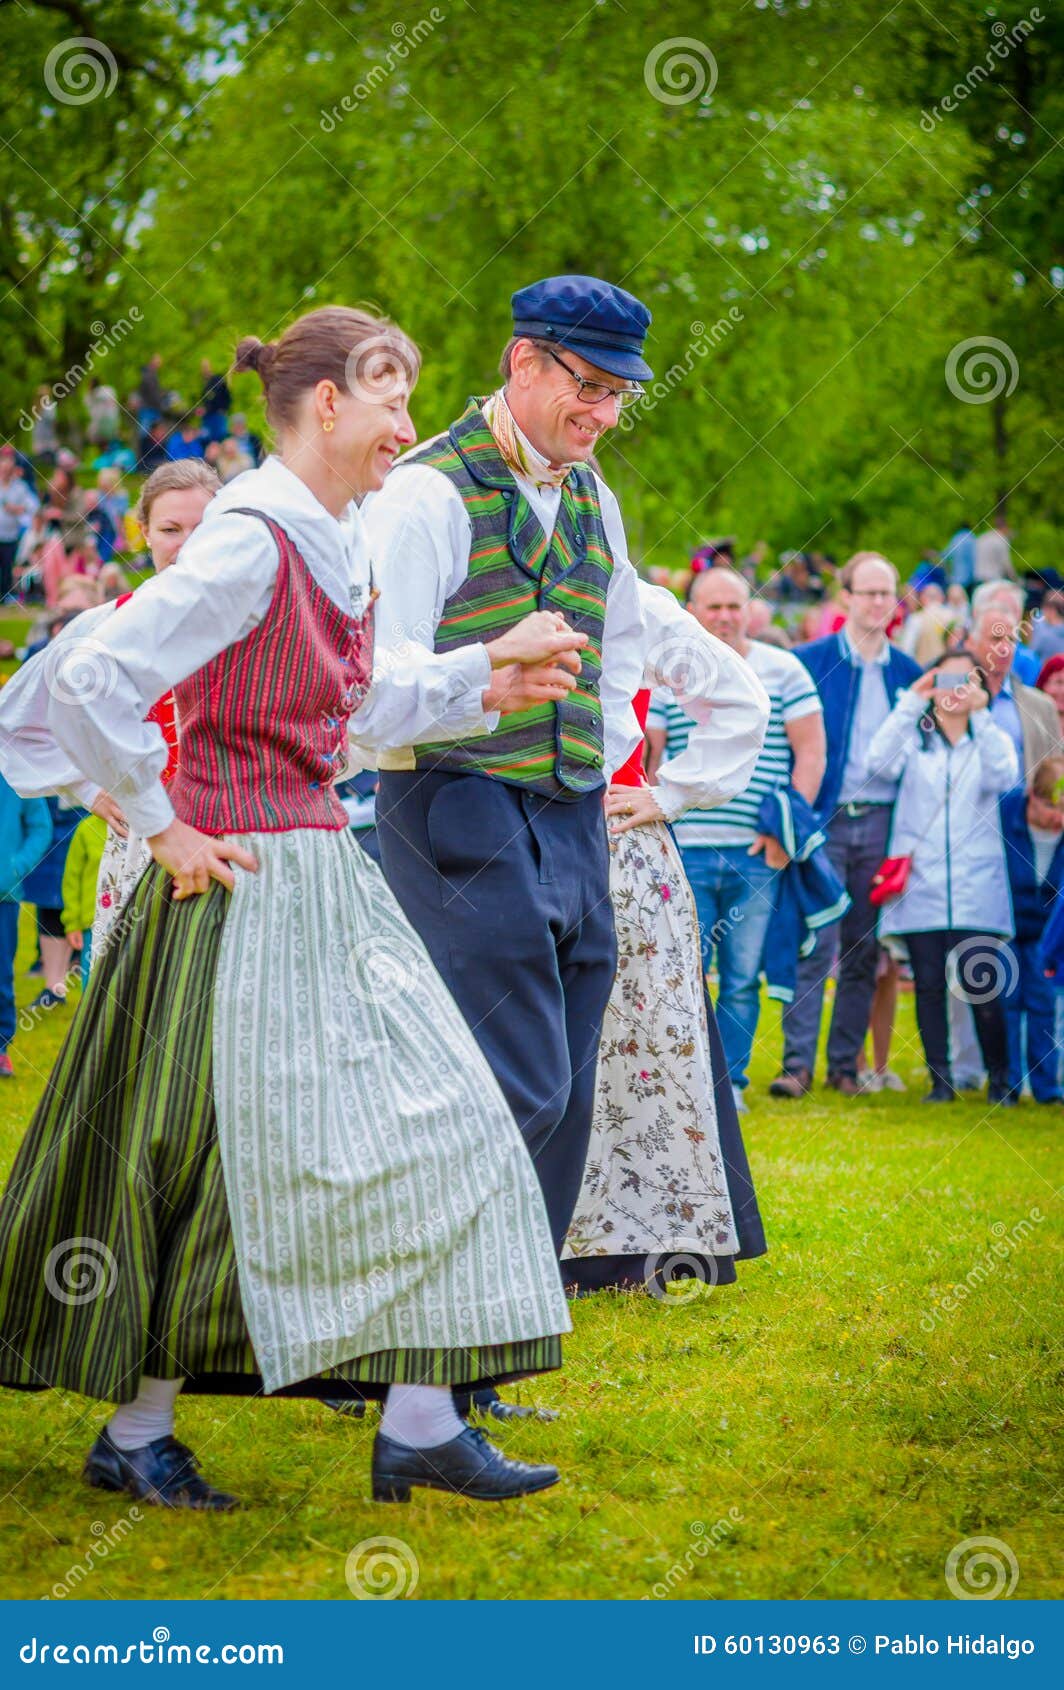 Dancing Around the Maypole in Midsummer Editorial Stock Photo - Image ...